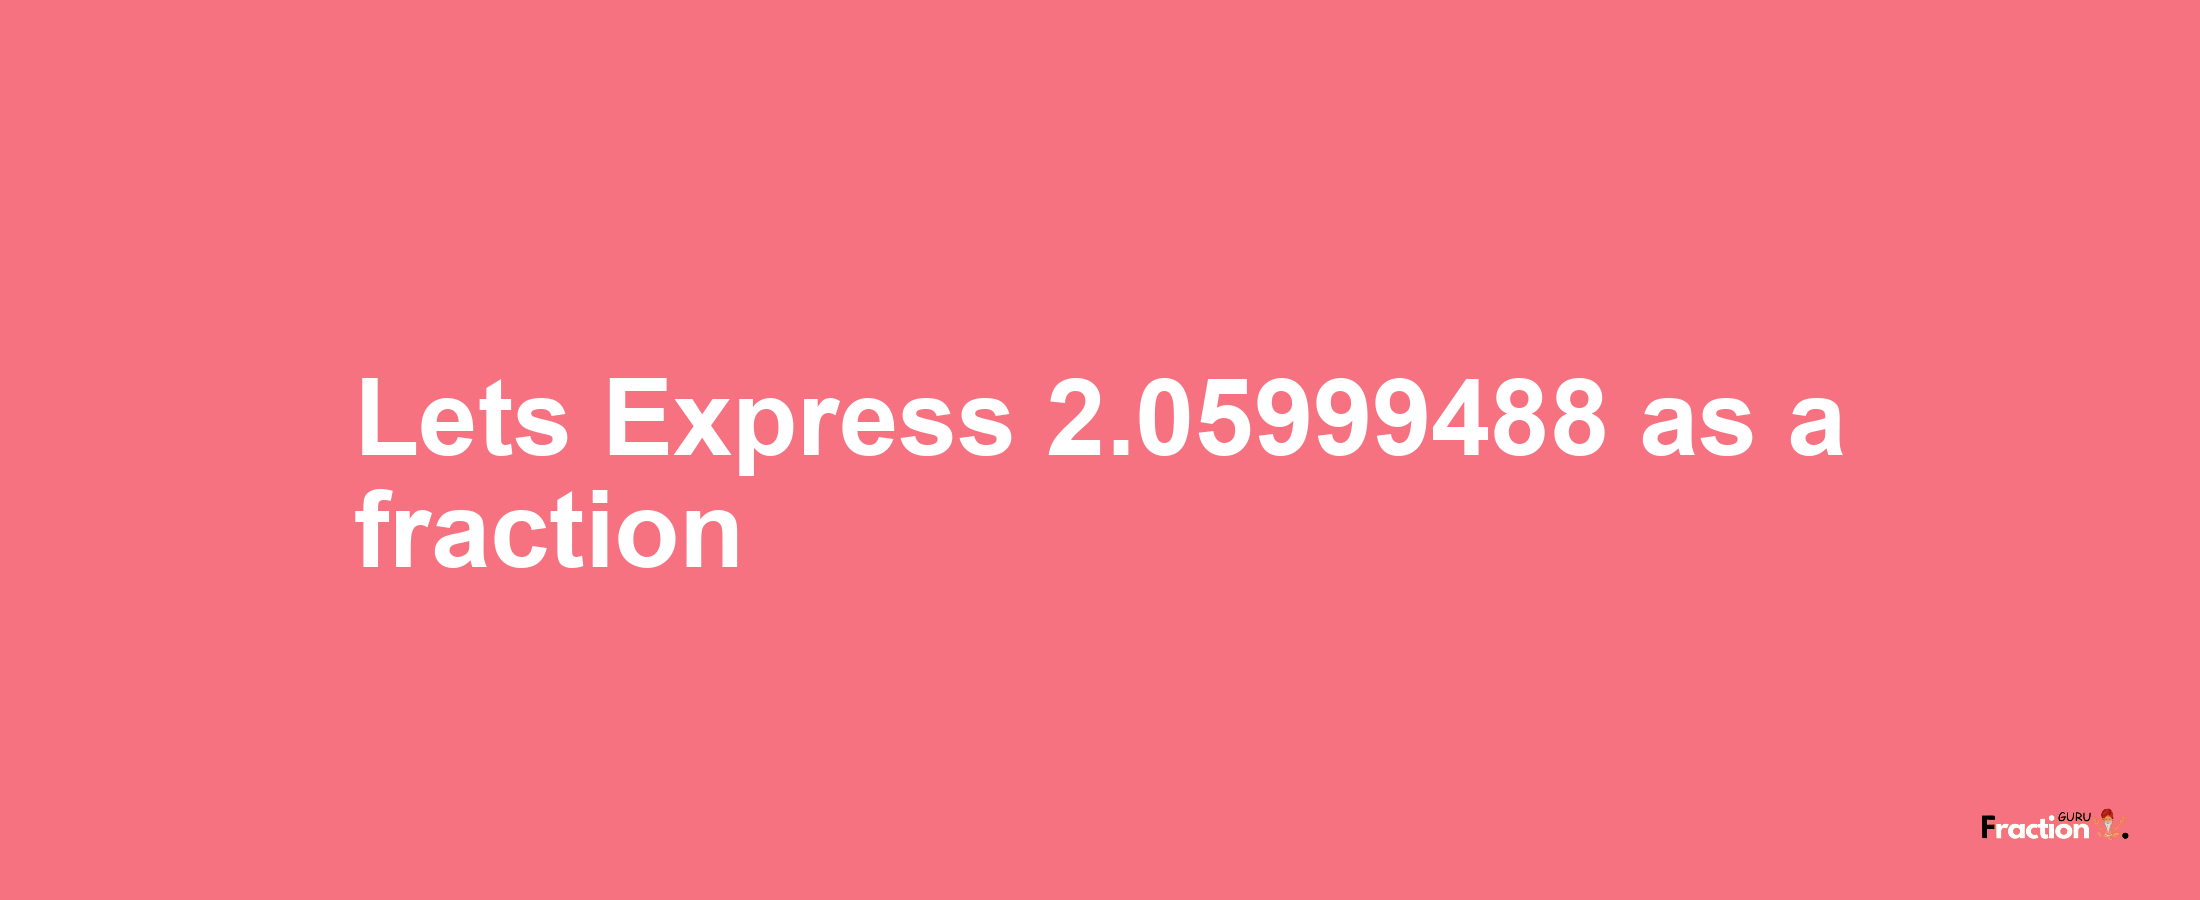 Lets Express 2.05999488 as afraction